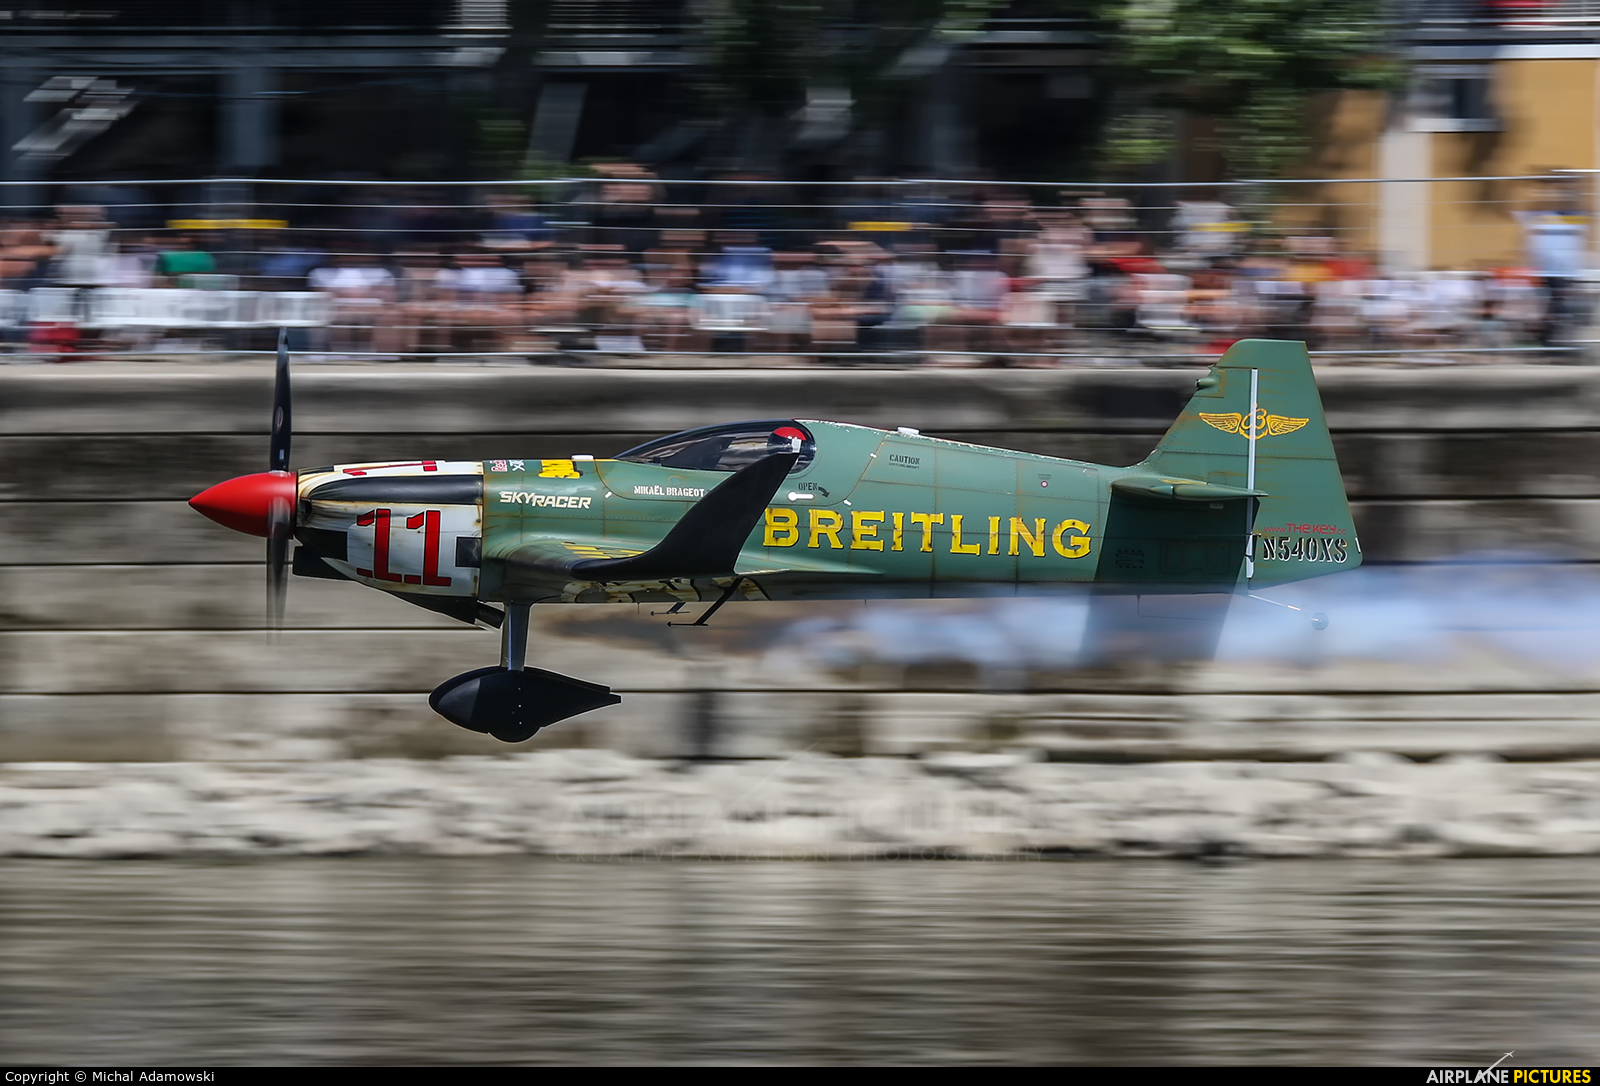 Breitling Devils N540XS aircraft at Off Airport - Hungary